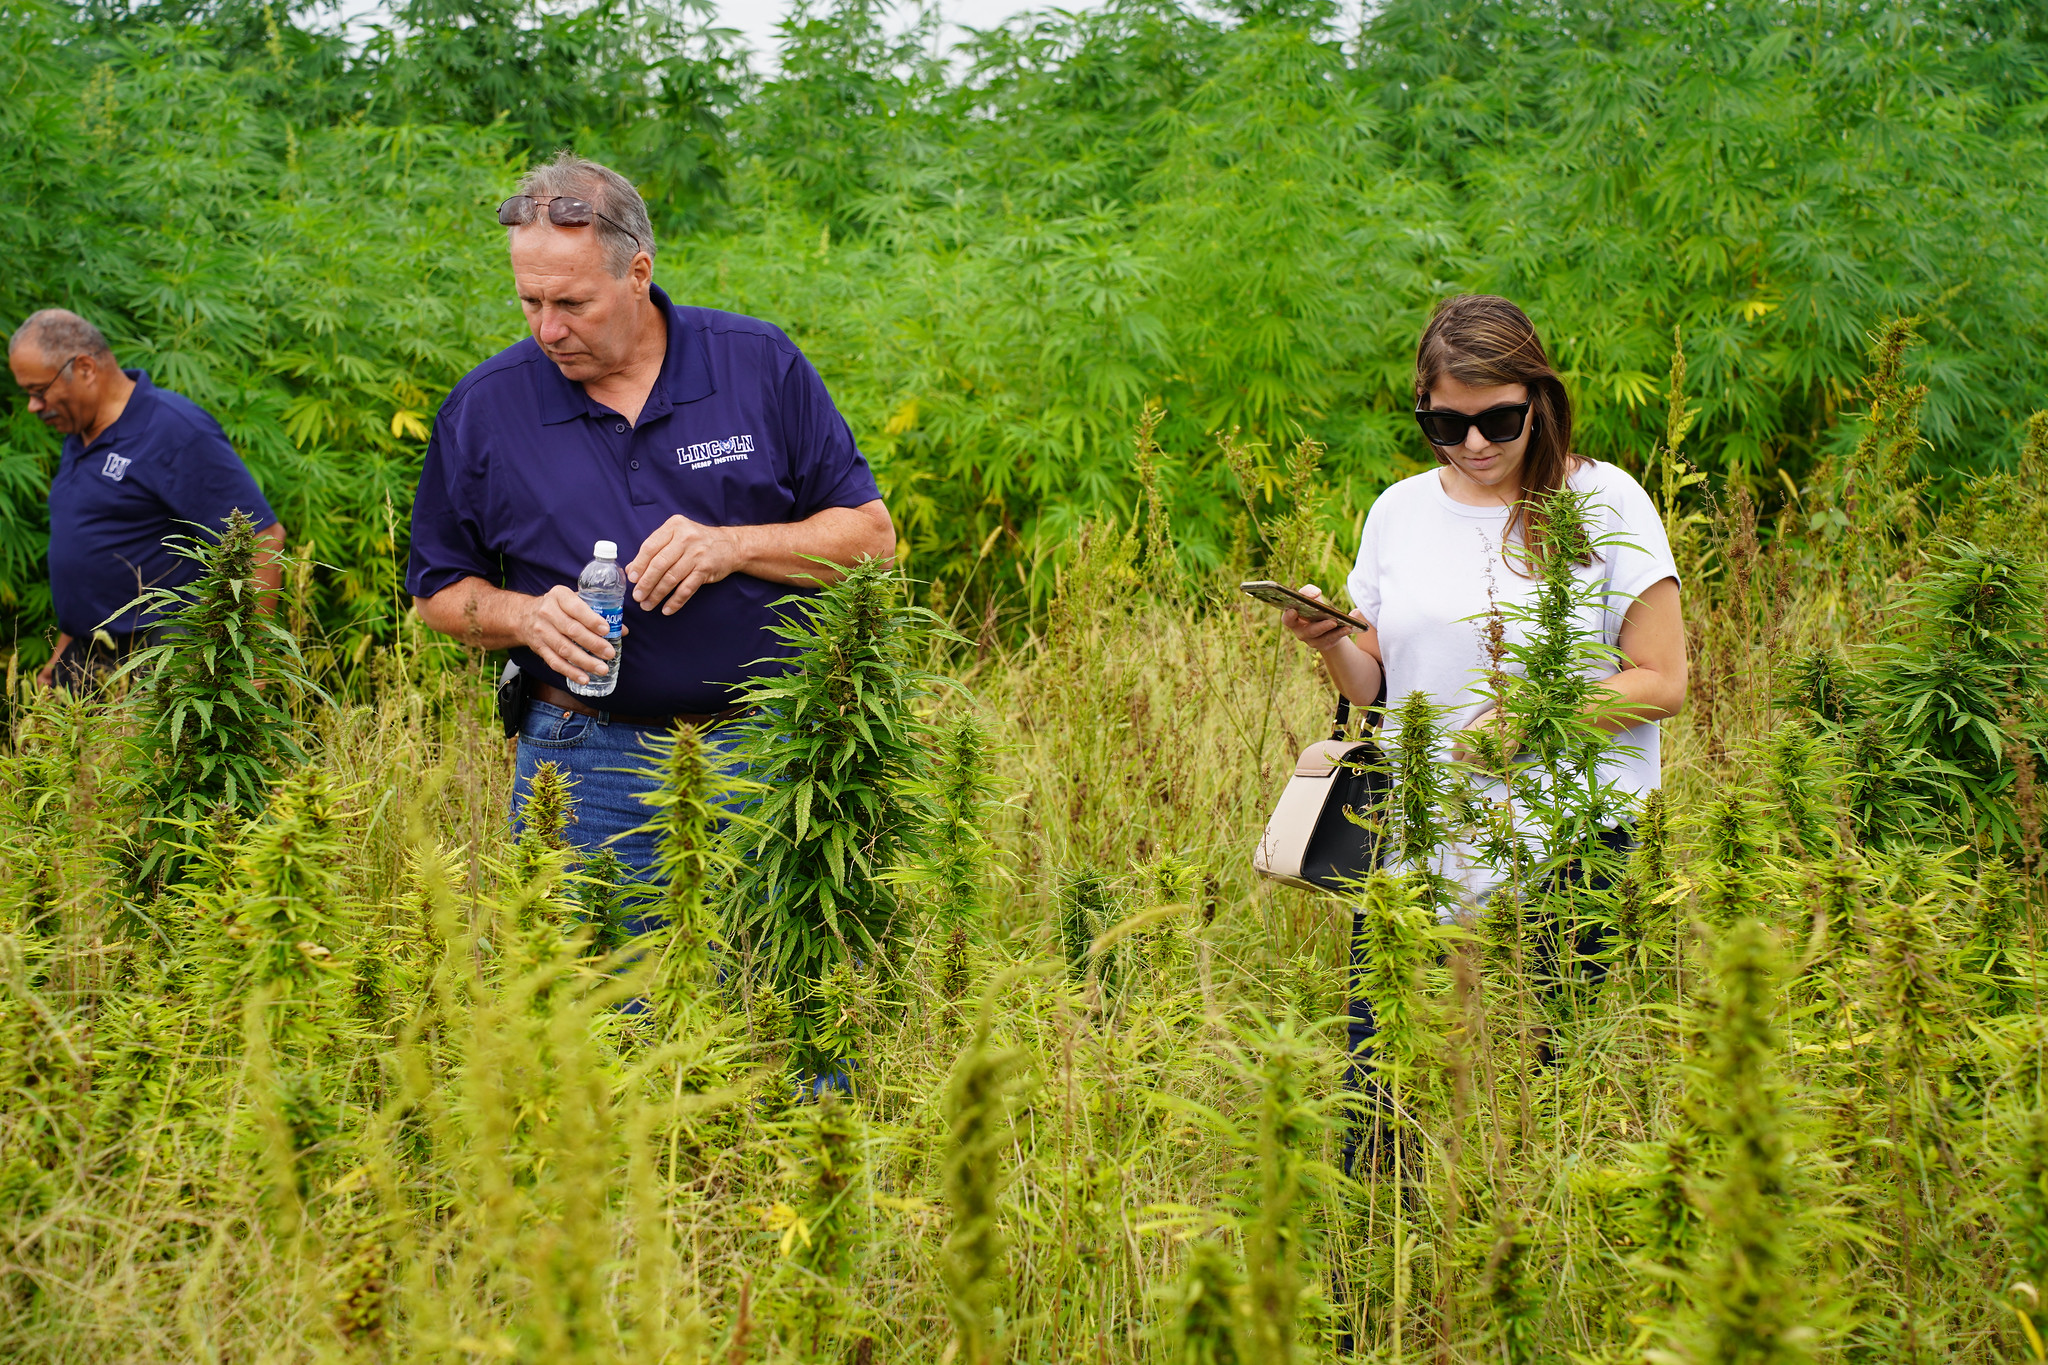 LU Farm Manager Chris Boeckmann supervises all three of Lincoln University’s farms. Here he showcases one of Carver Farm’s leading projects on industrial hemp.